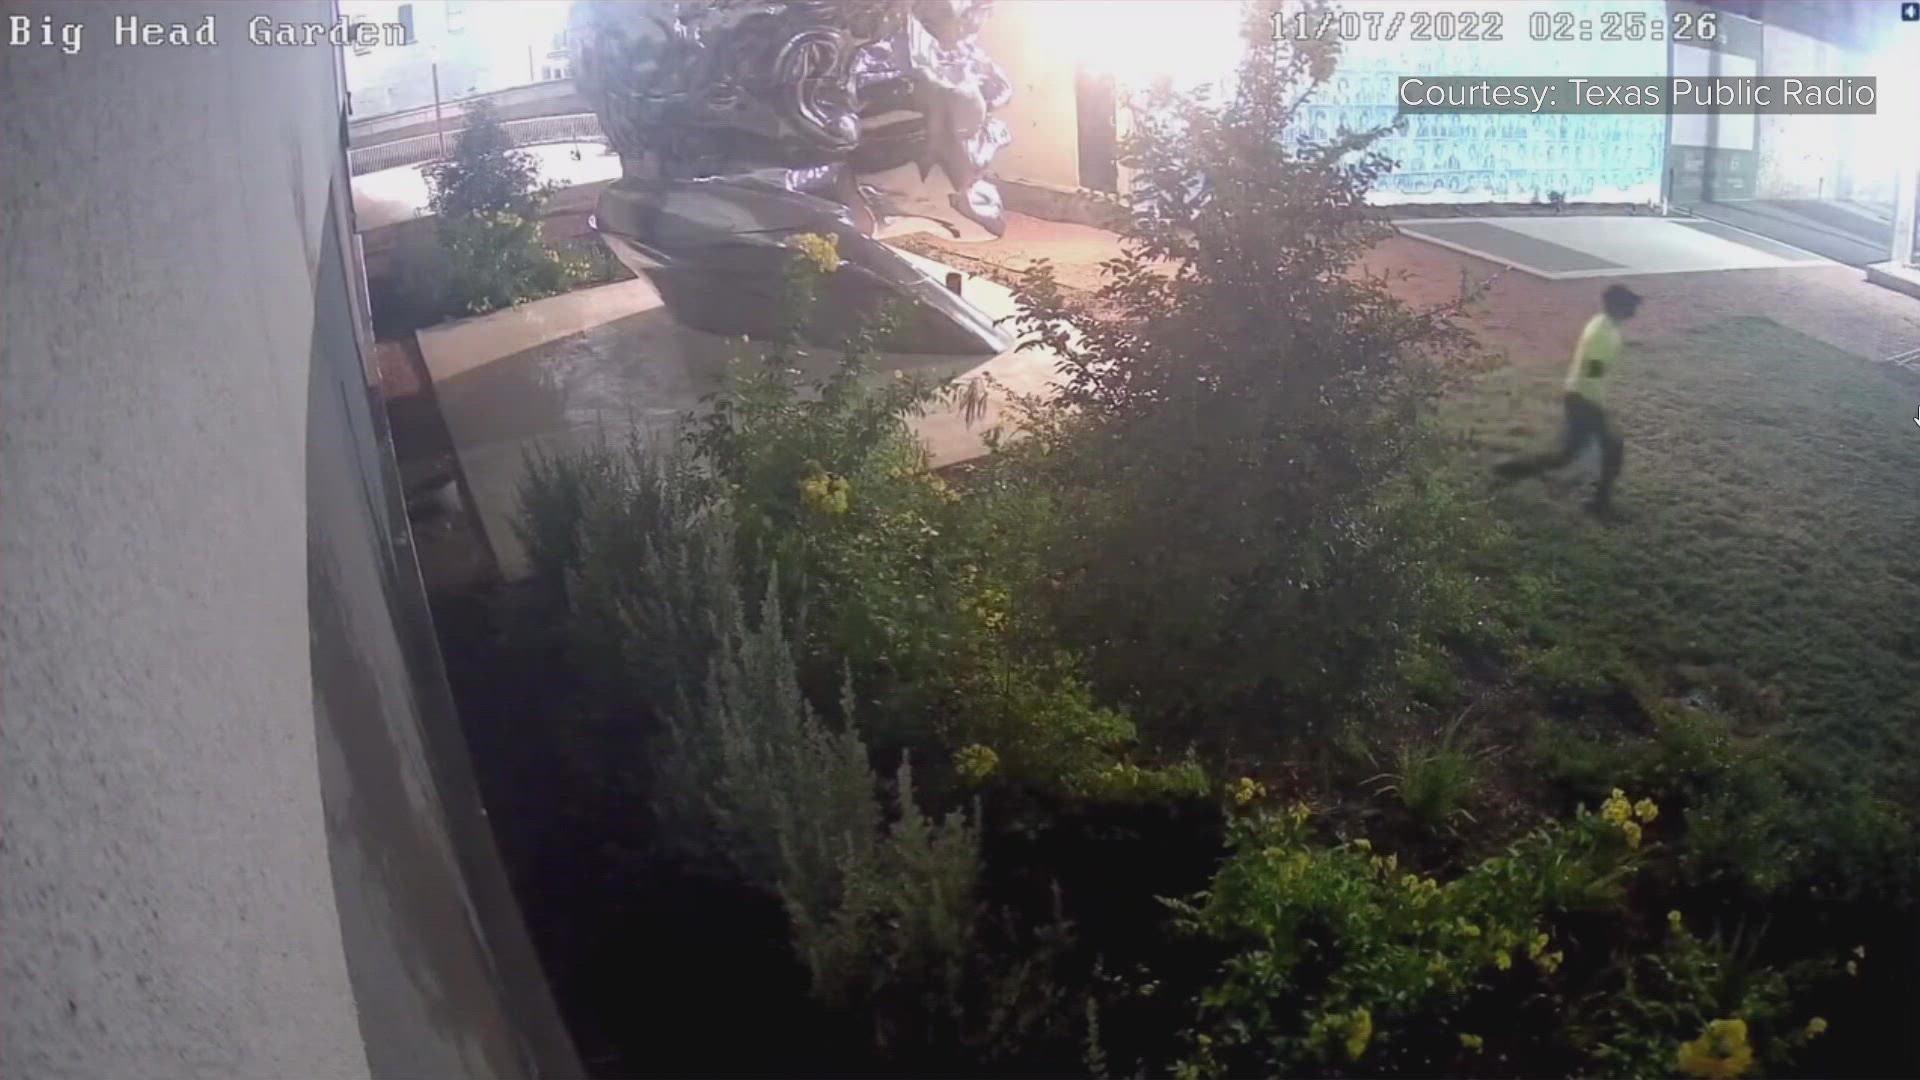 Video shared by TPR shows someone placing a device underneath a statue of Vladimir Lenin's head, which is not on TPR's property, before an explosion.